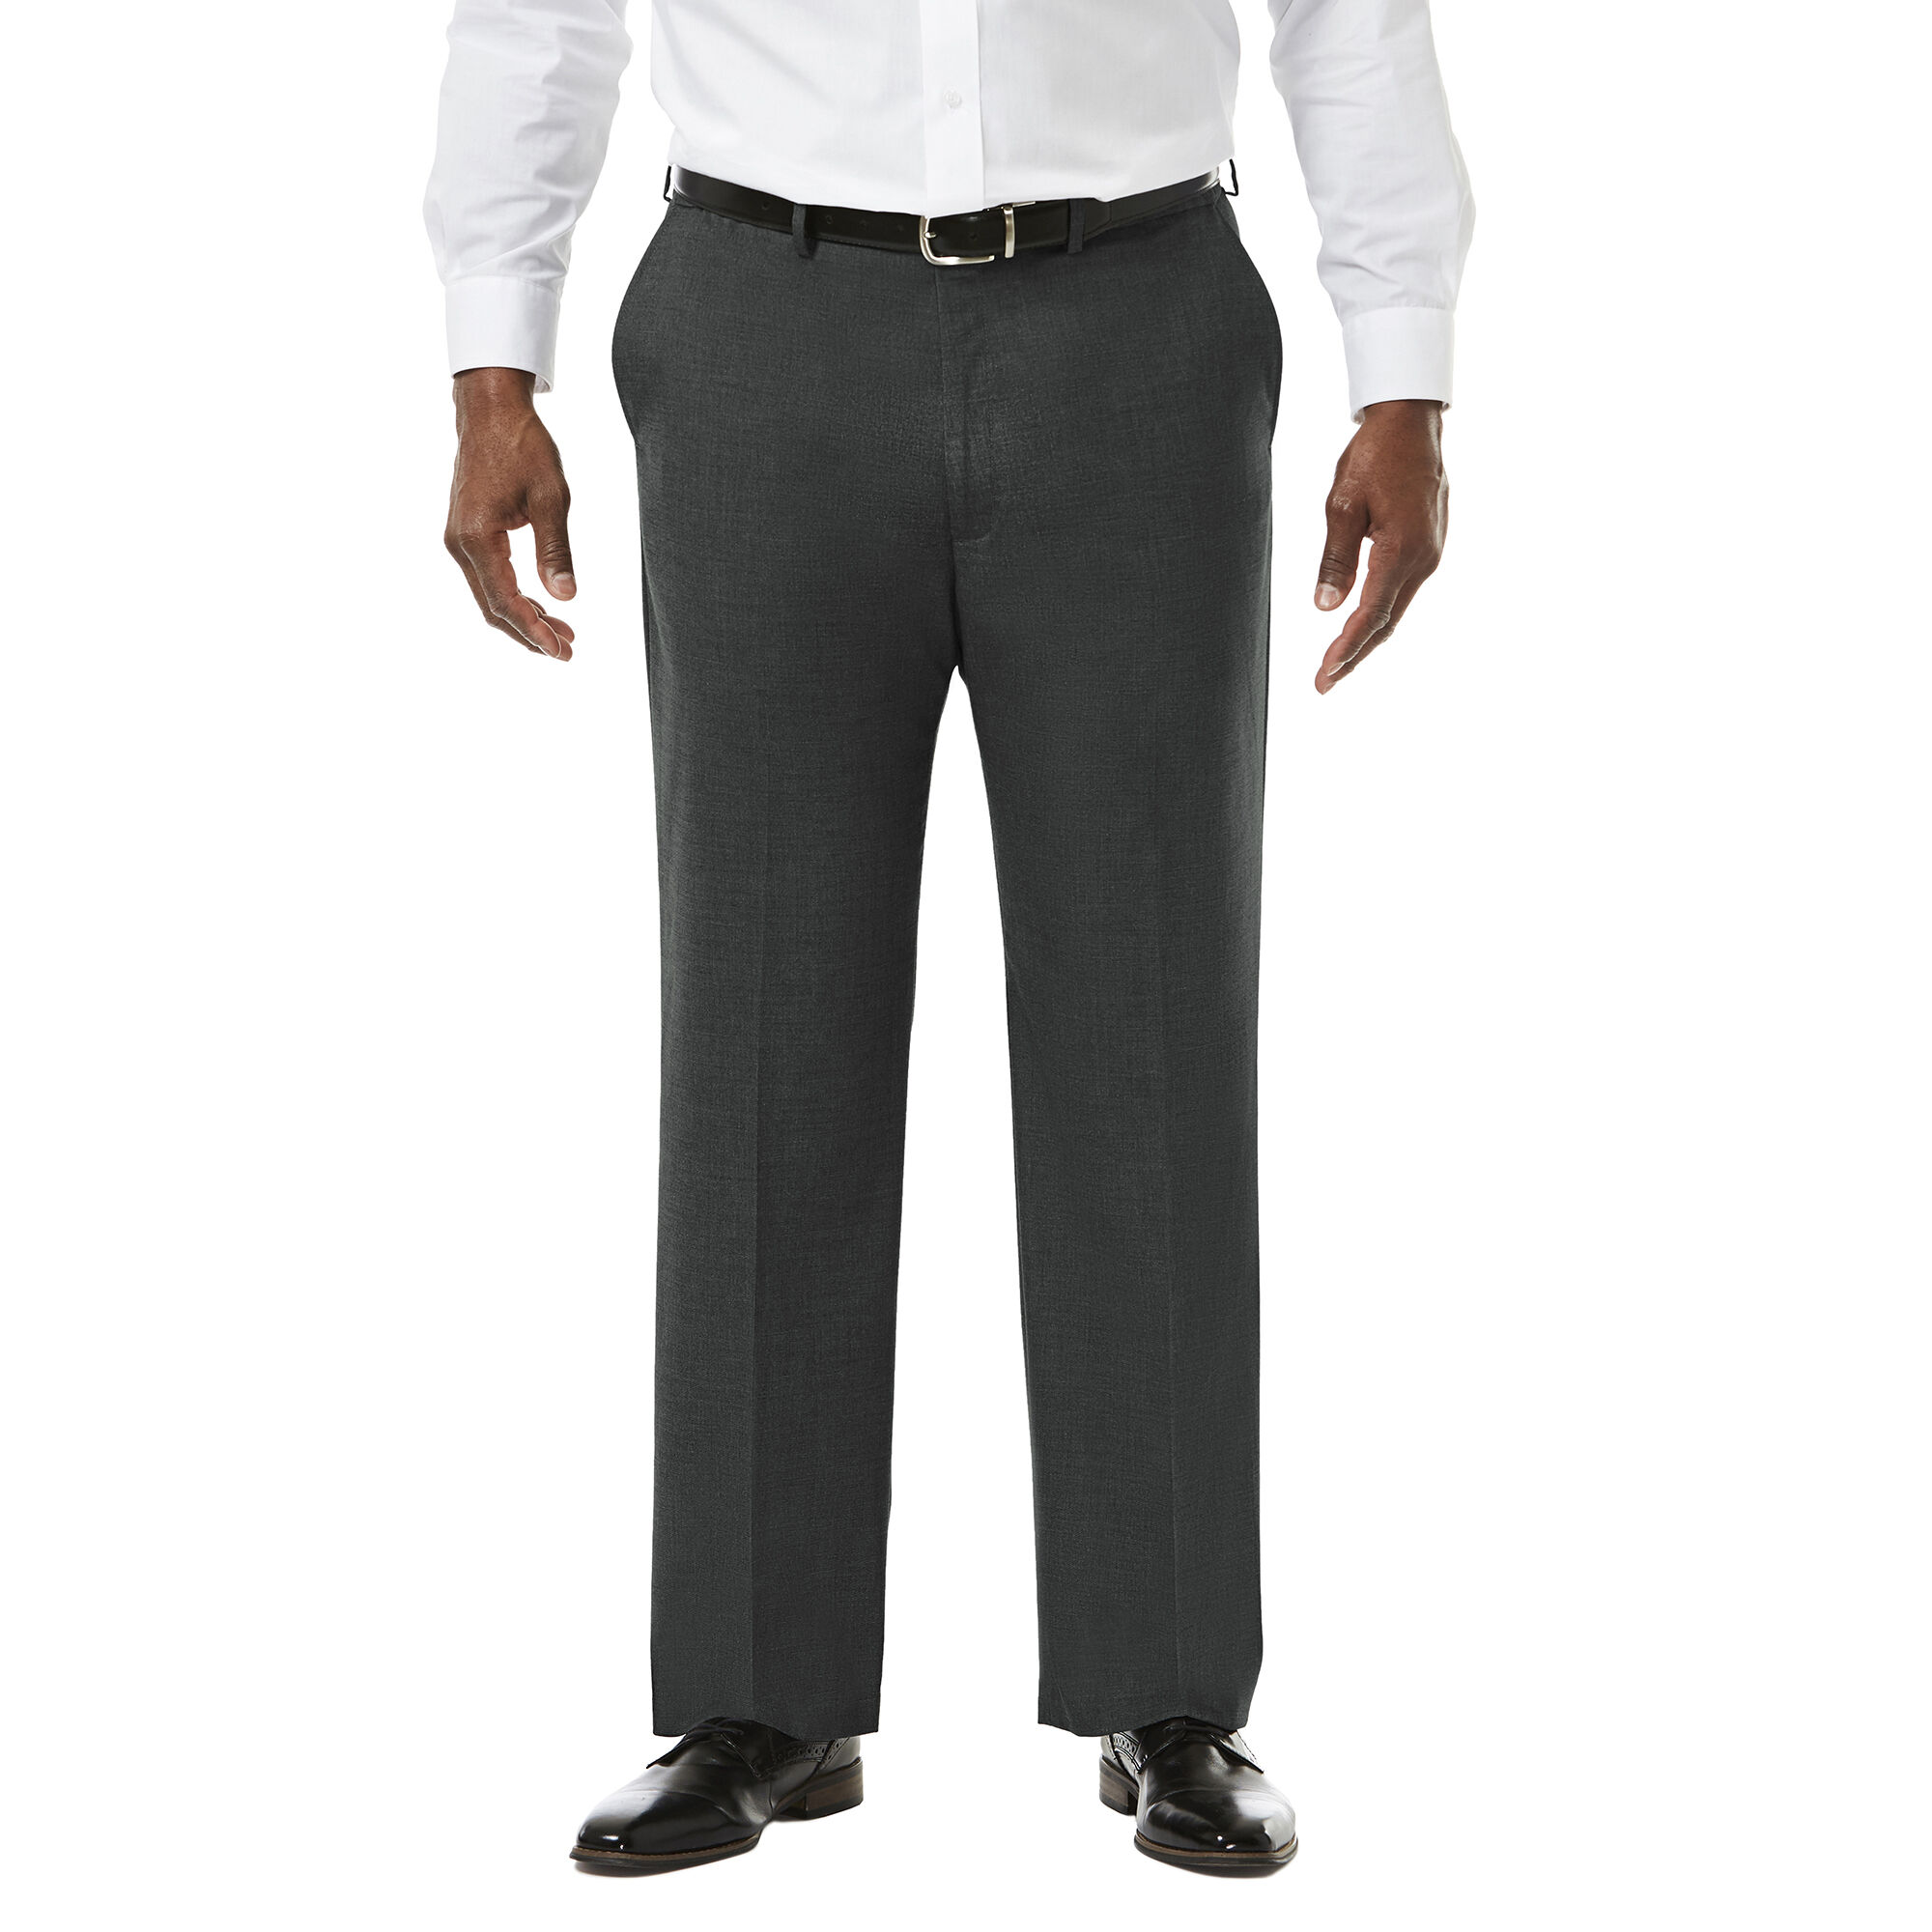 Big & Tall J.M. Haggar Premium Stretch Suit Pant - Flat Front Medium Grey Big & Tall Classic Fit Flat Front Hidden Expandable Waistband: Expands up to 3" 64% Polyester, 34% Viscoe Rayon 2% Spandex Dry Clean Only Imported Style #: HY90182 Size - L